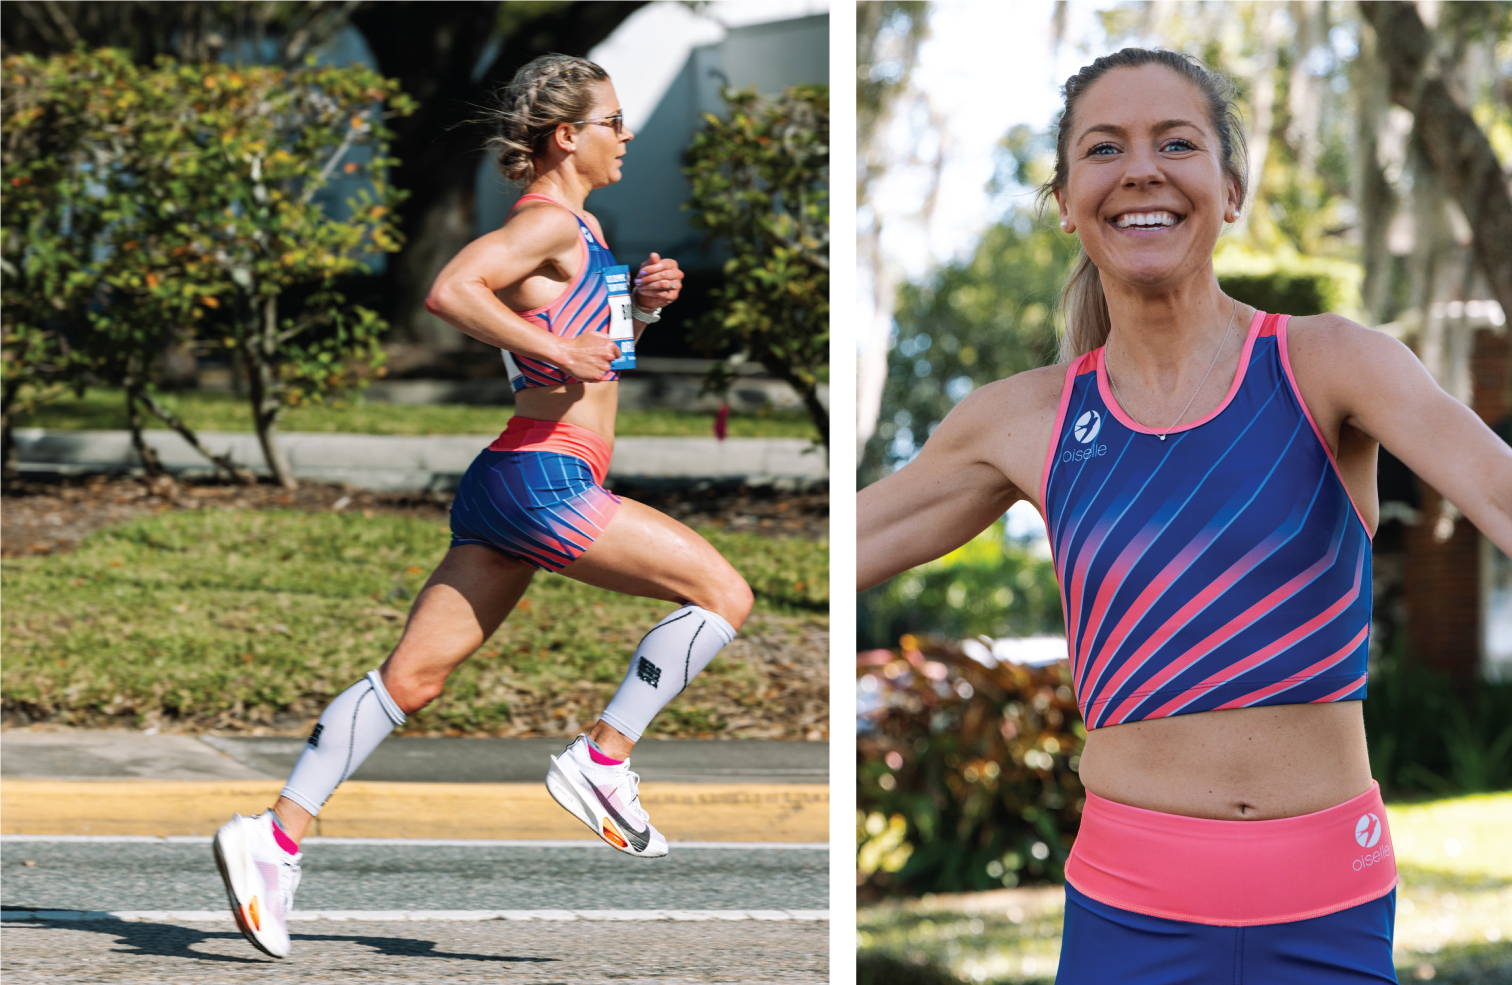 Left: Molly Bookmyer racing the Olympic Marathon Trials. Right: Portrait of Molly smiling in her Oiselle uniform